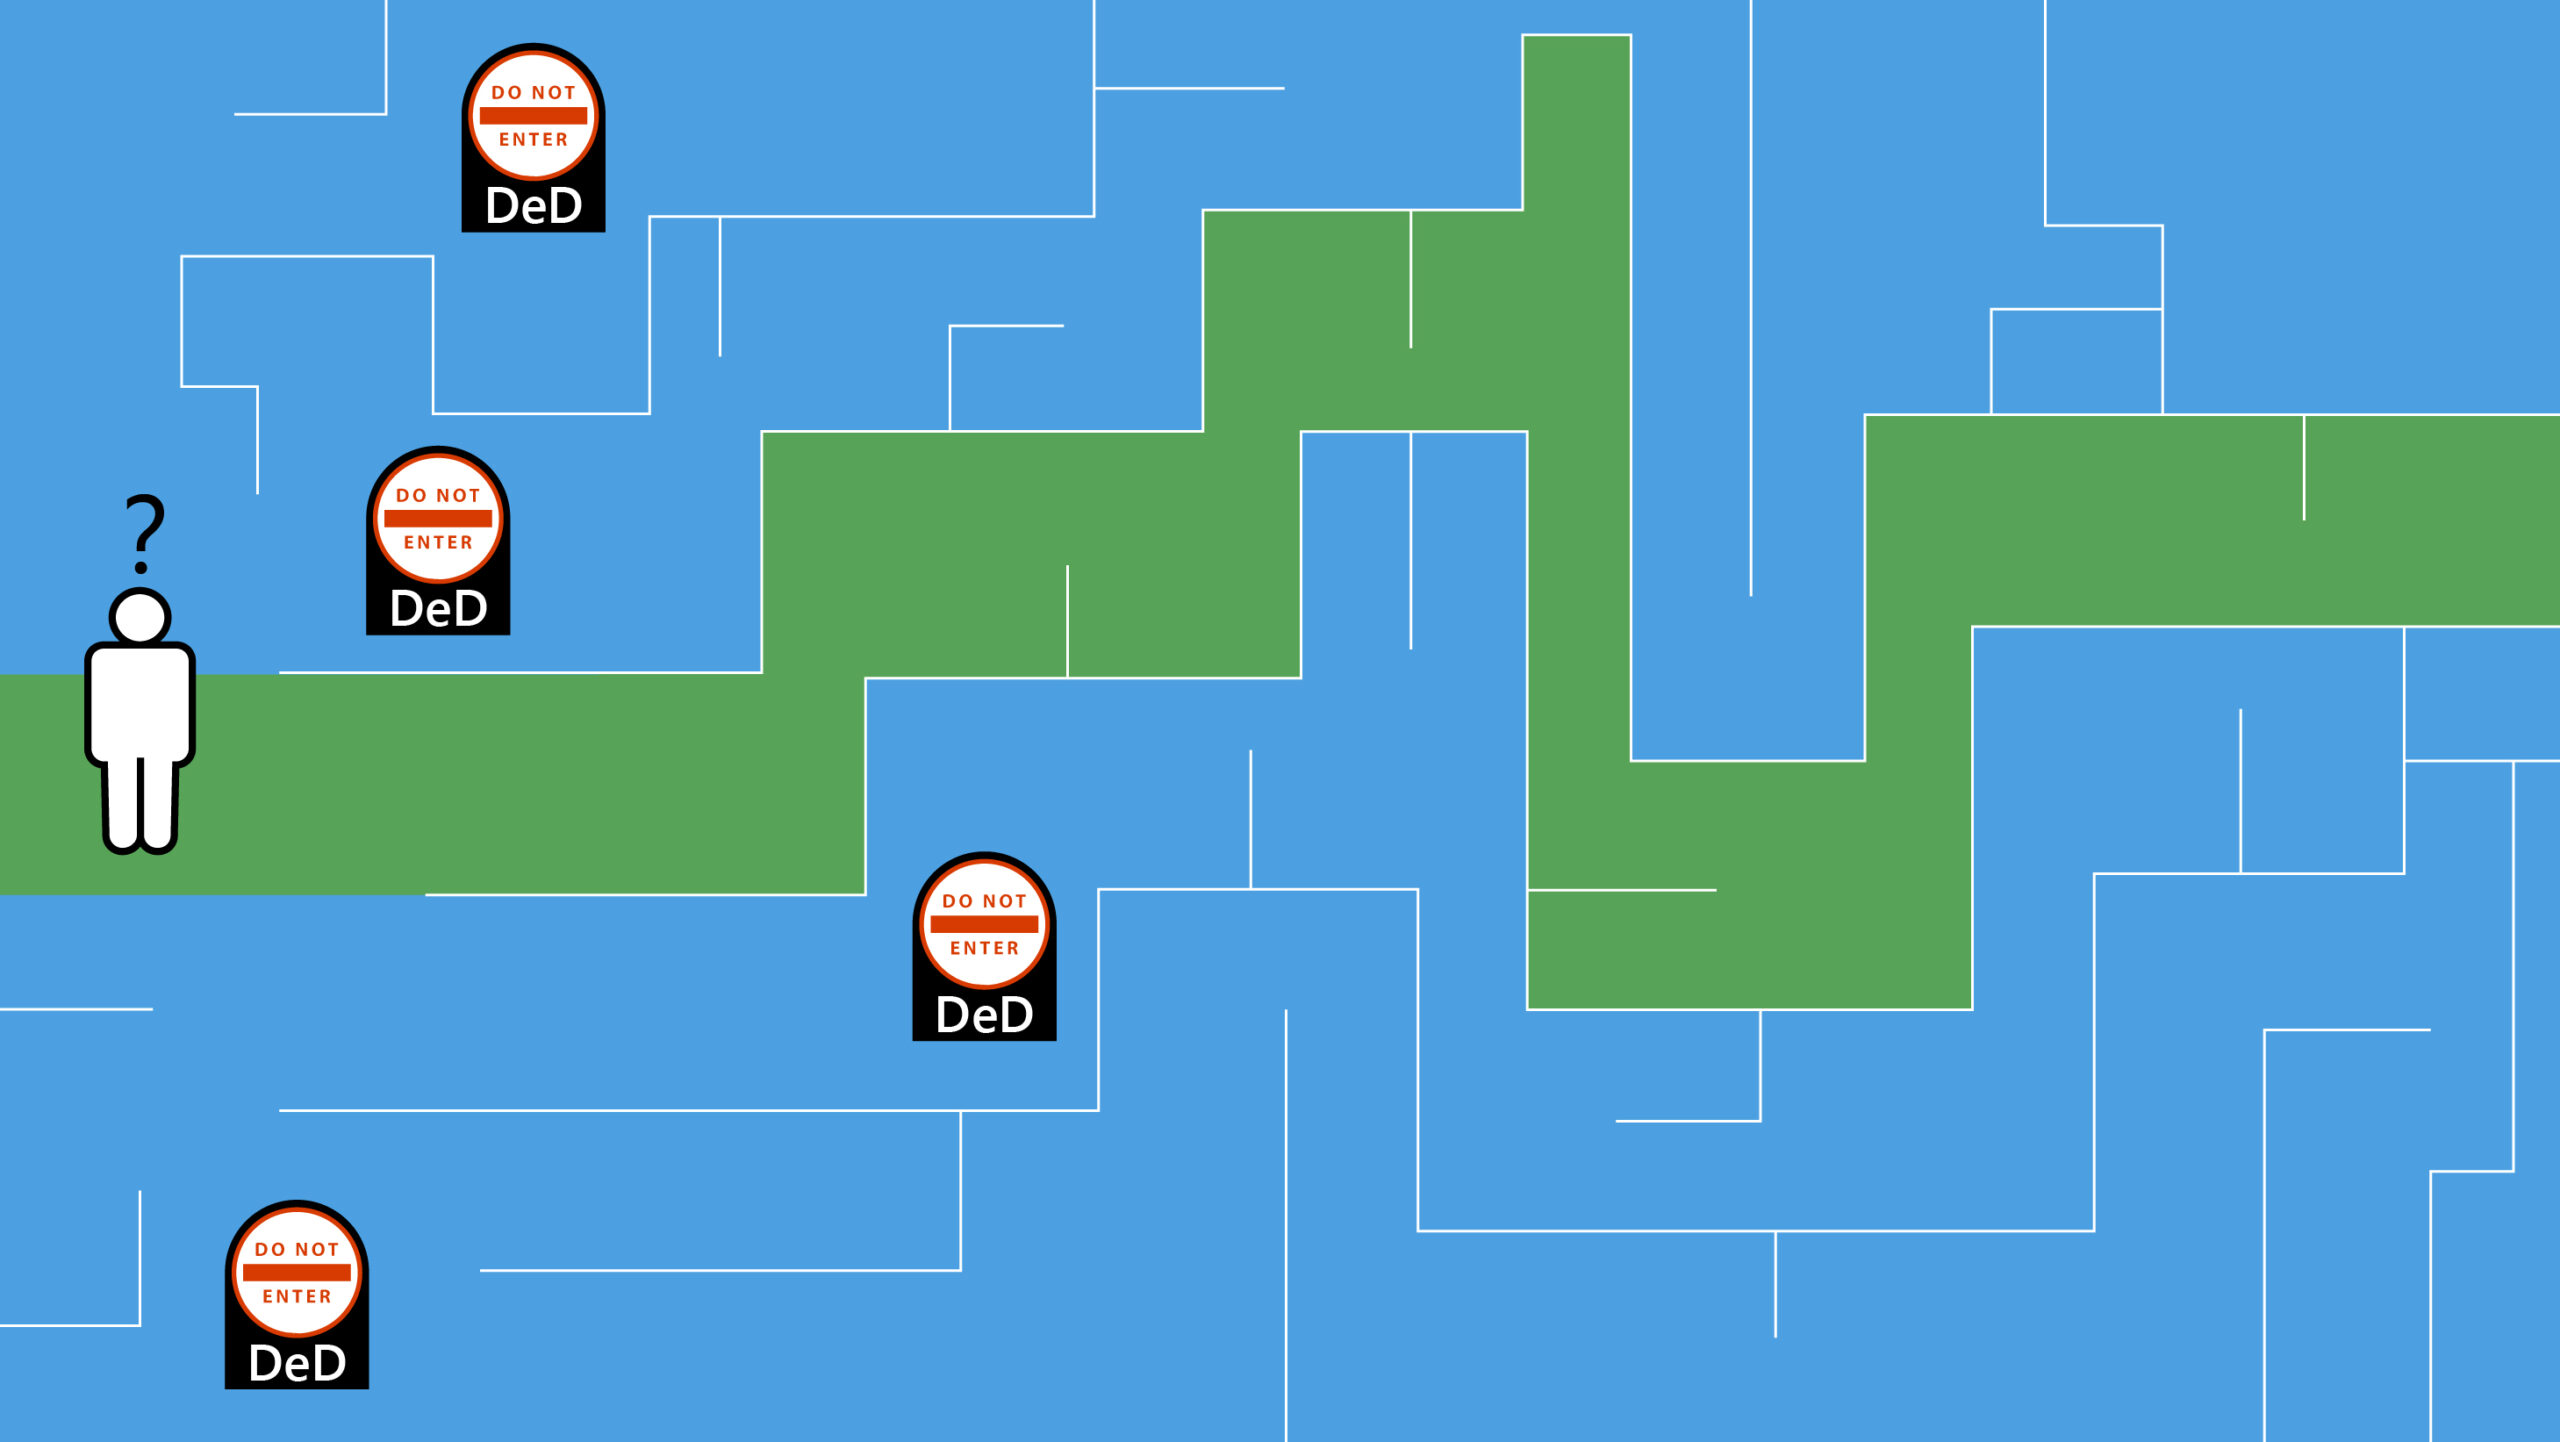 maze with multiple routes - all but one is blocked by DeD